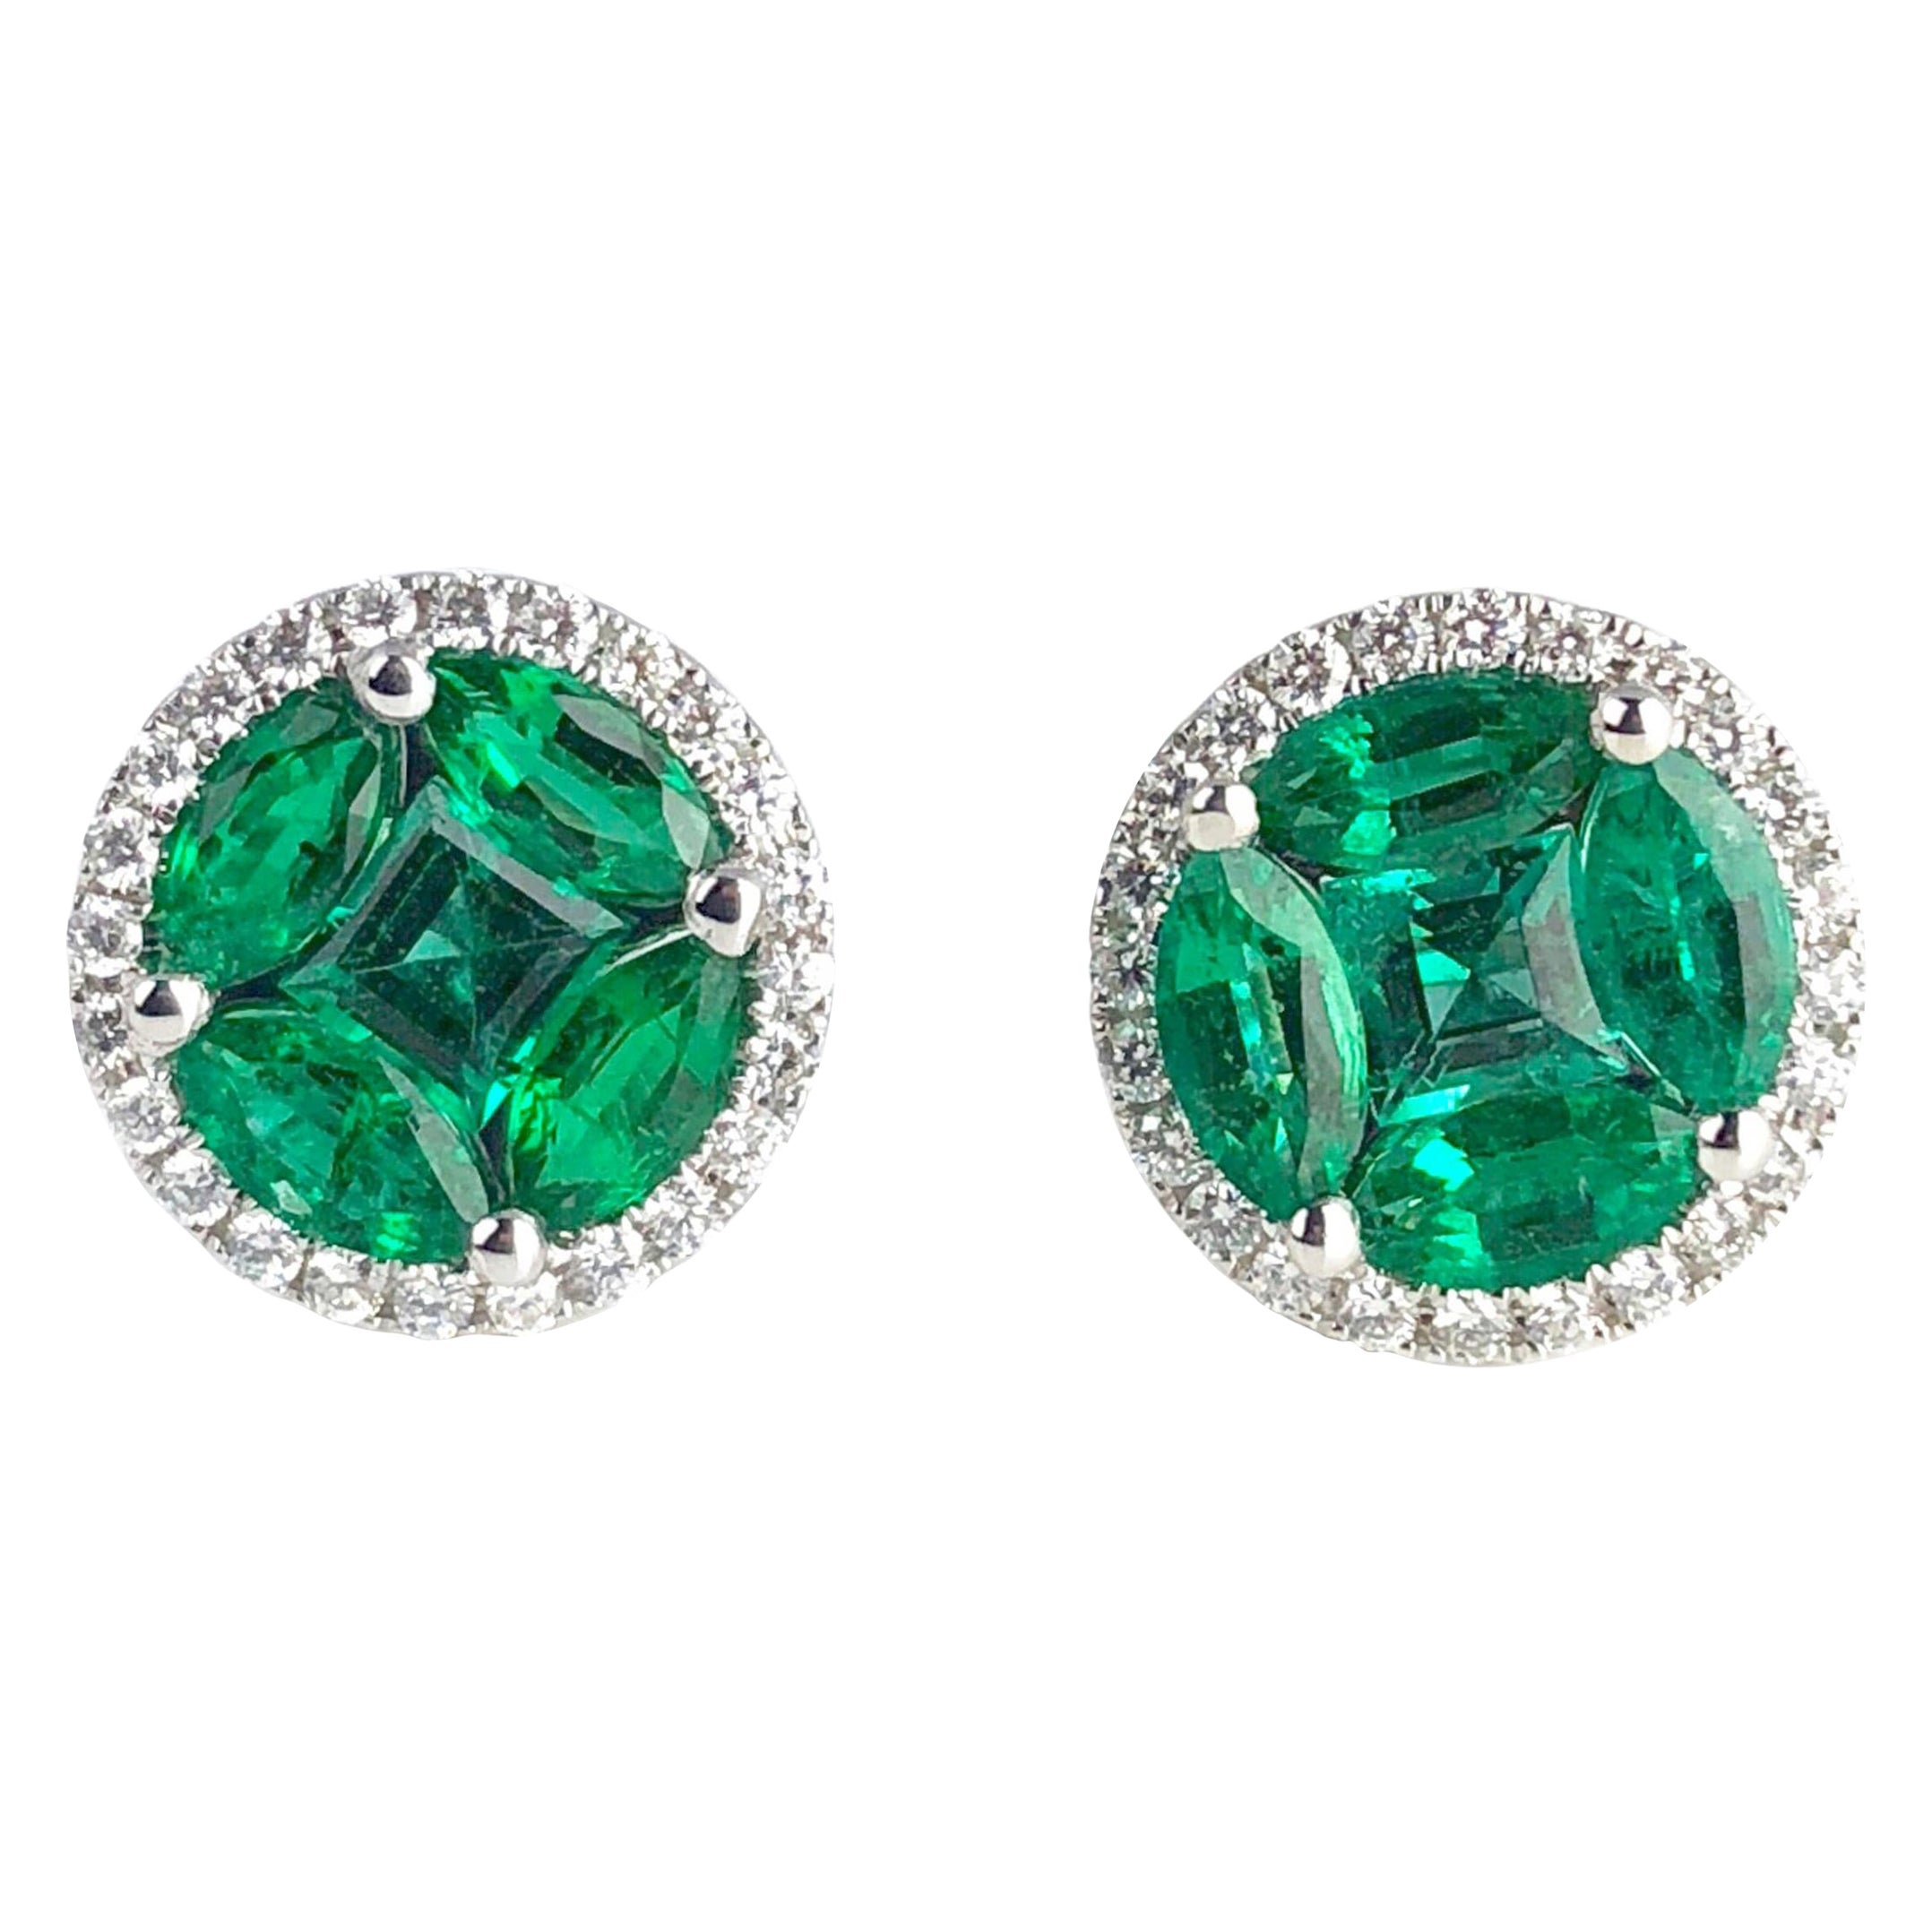 1.28 Carat Emerald and 0.22 Carat Diamond Stud Earrings in 18W Gold ref1183 For Sale